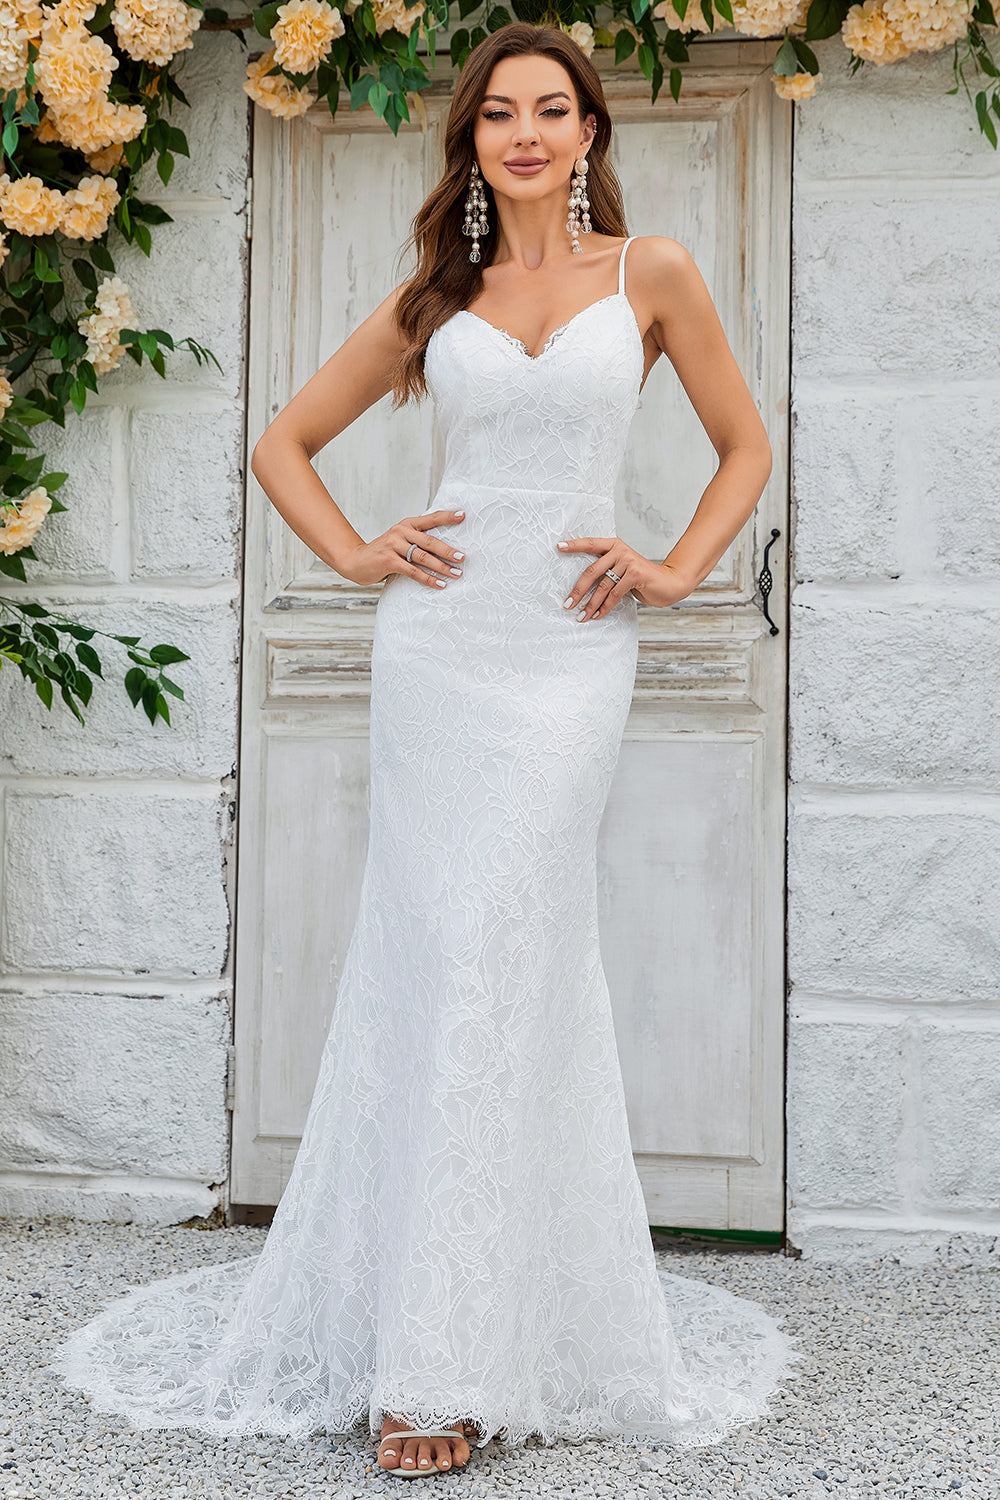 Ivory Mermaid Spaghetti Straps Backless Wedding Dress with Lace